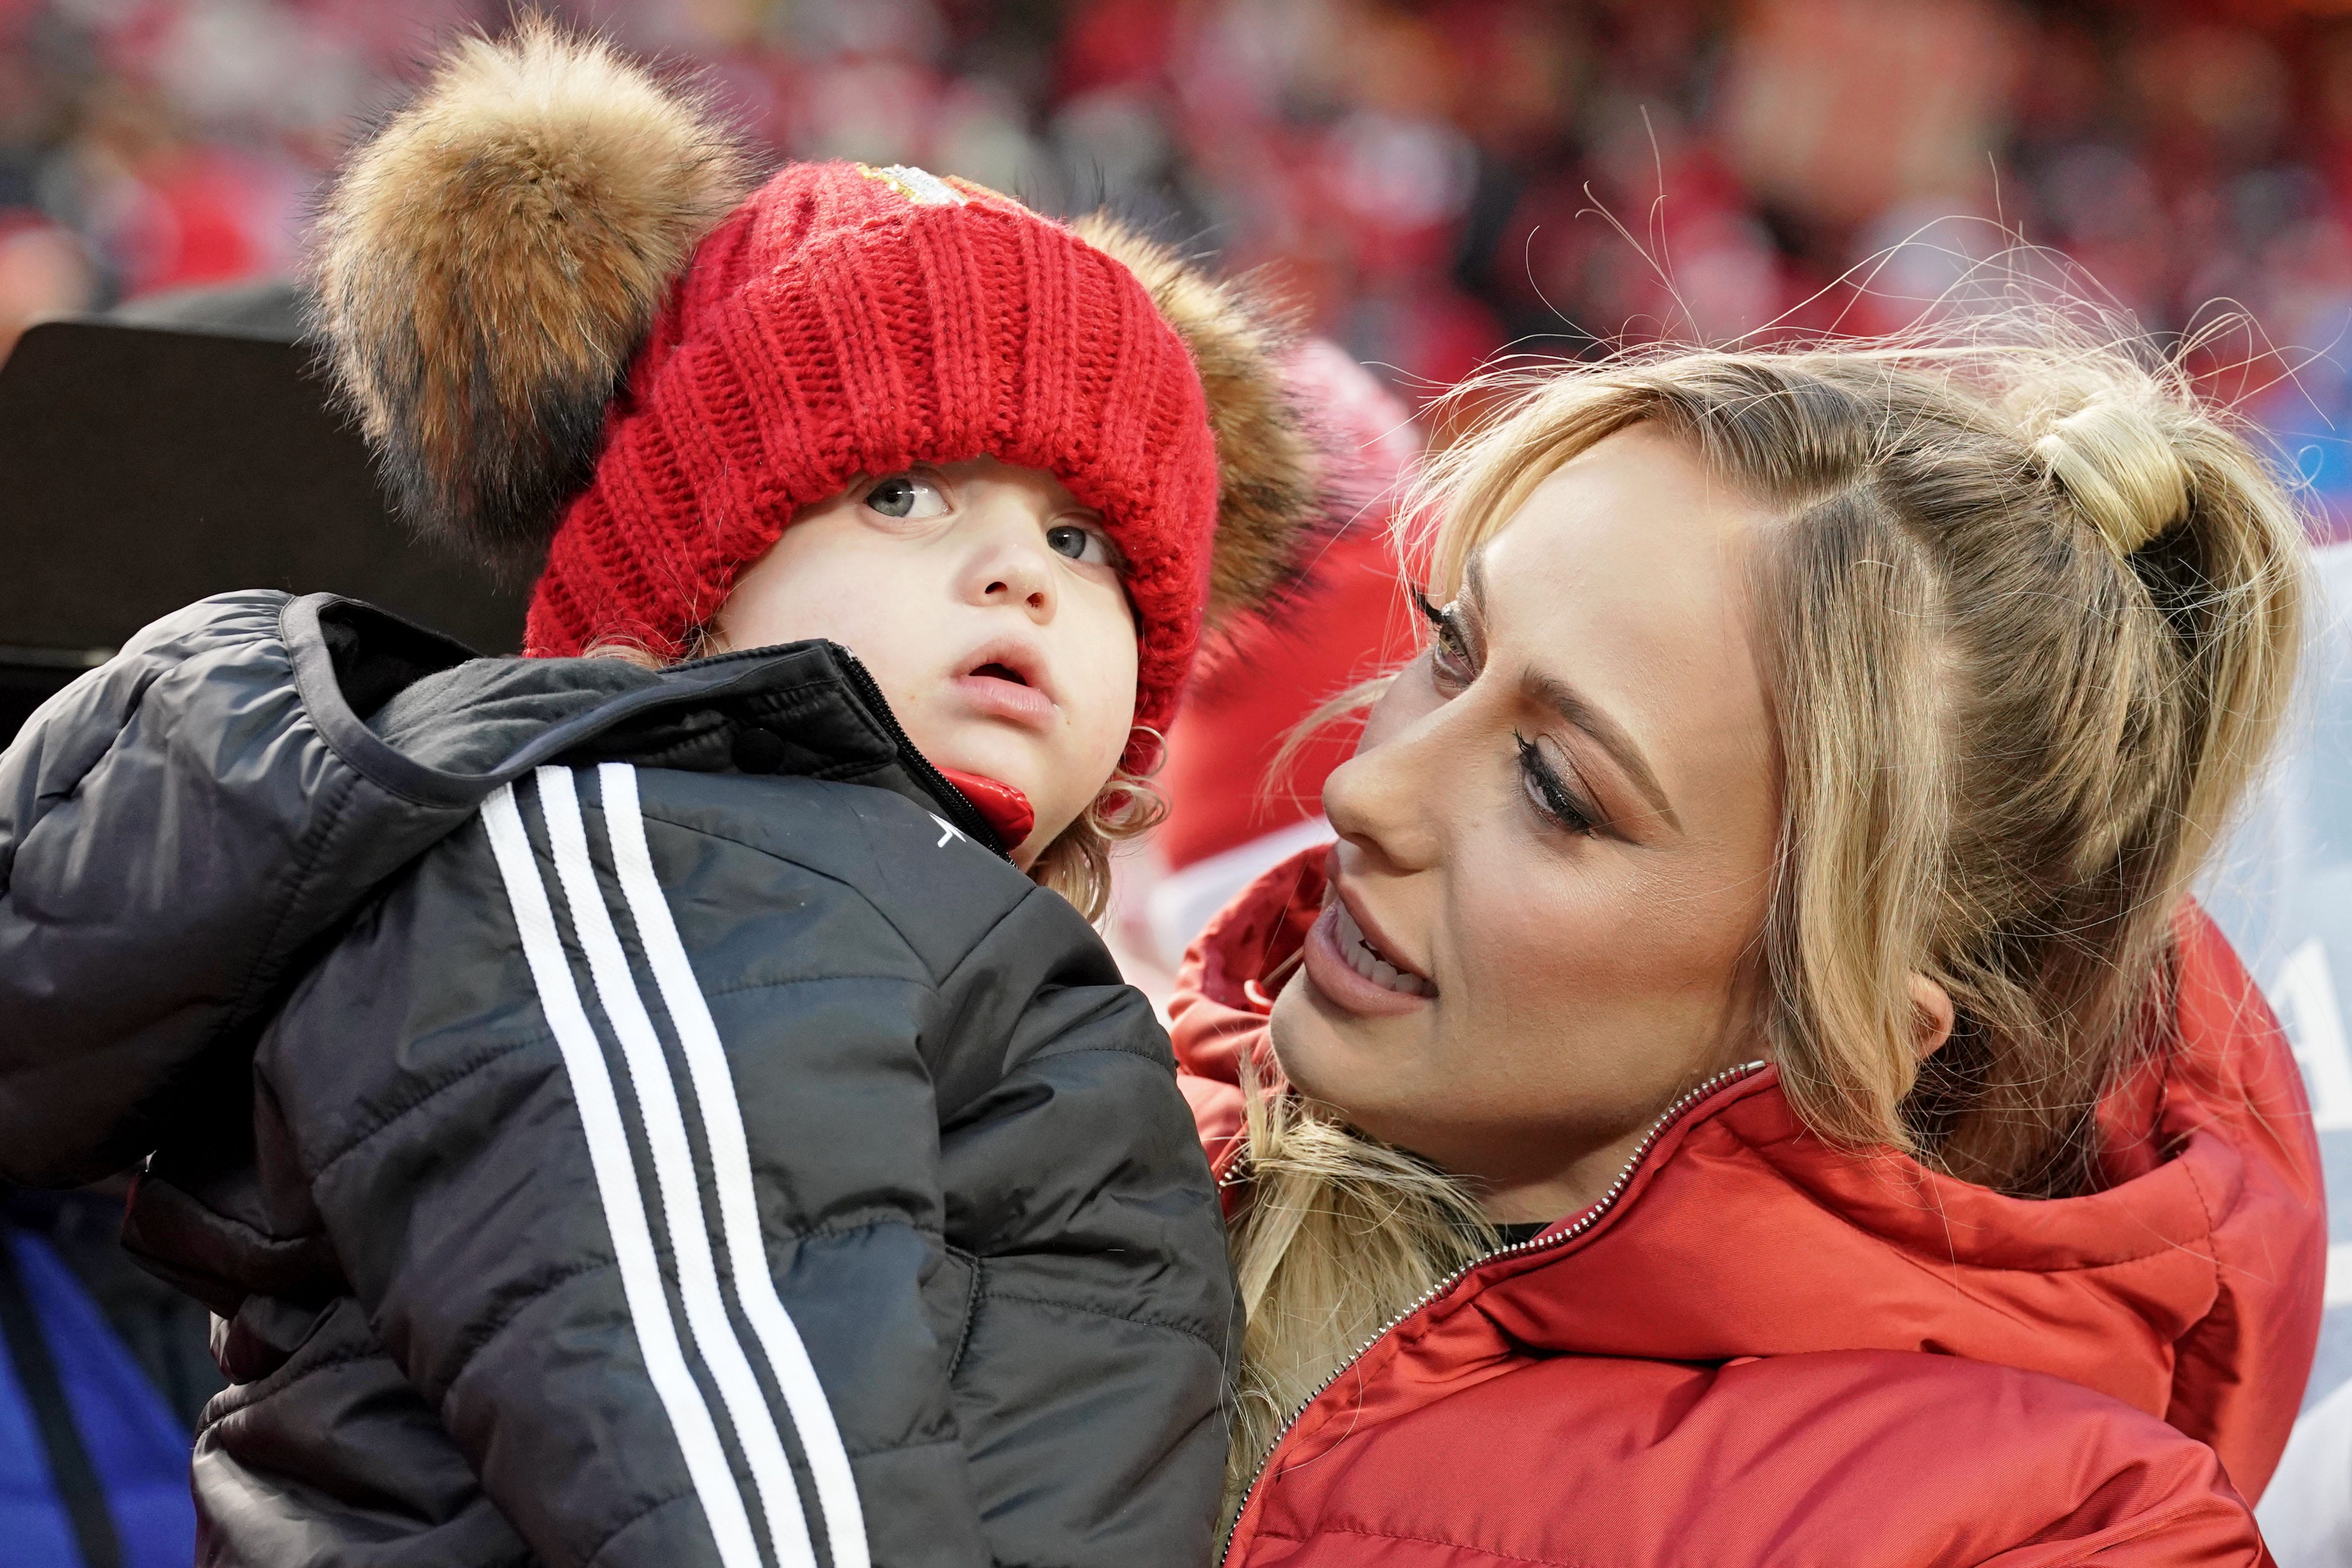 'All hands on deck': Patrick Mahomes' wife, Brittany, on caring for two young kids at Super Bowl 57